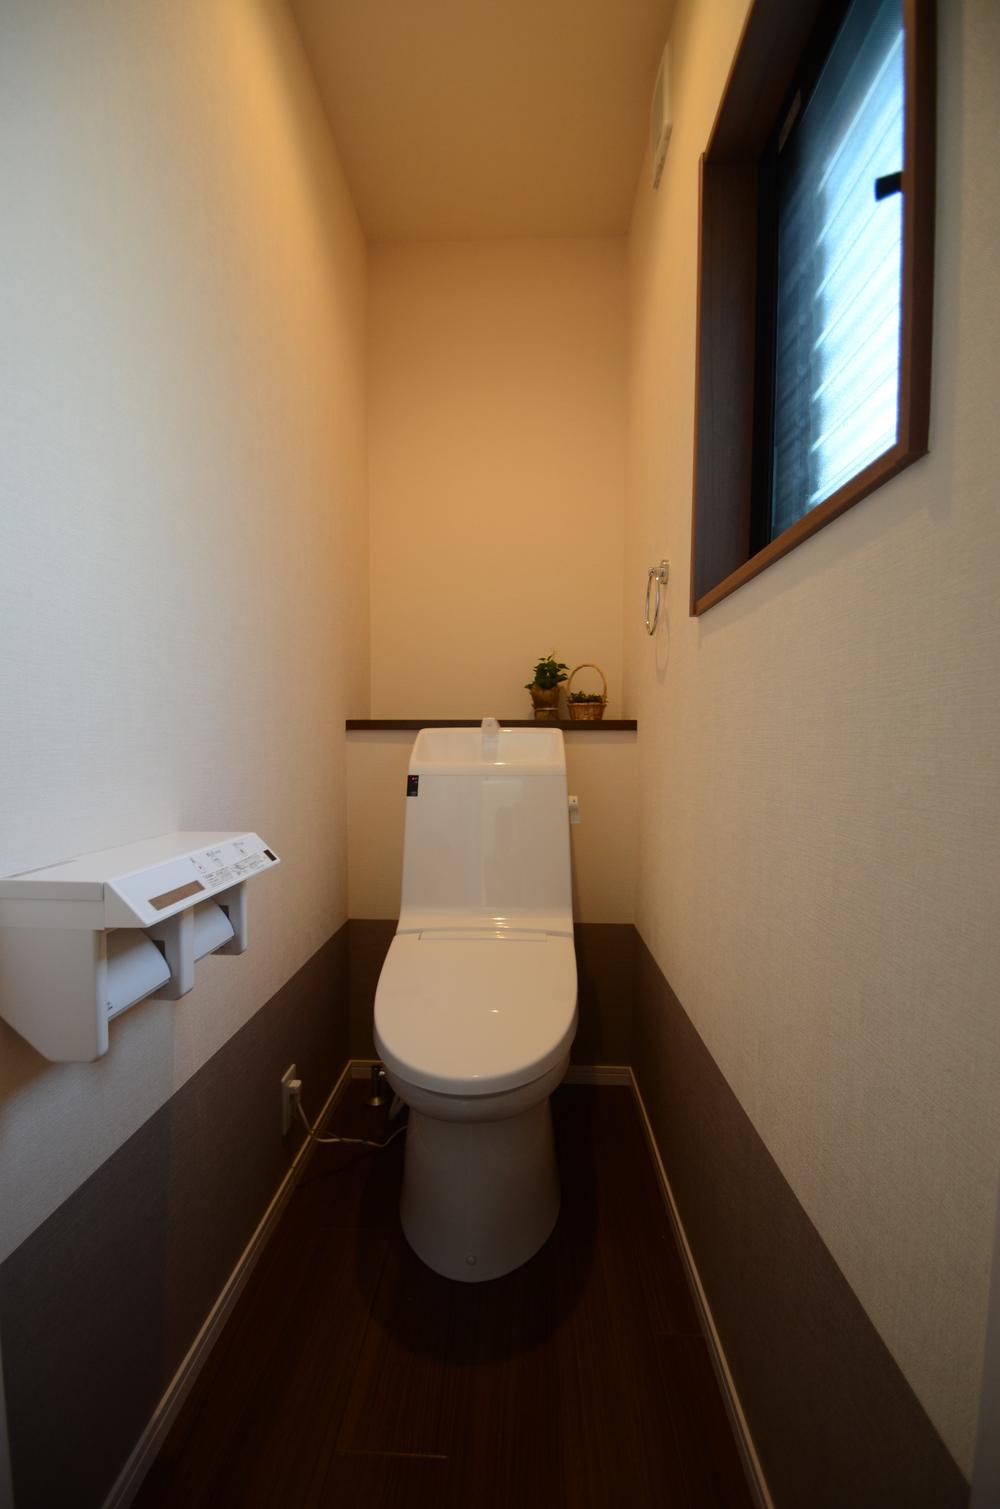 Toilet. The first floor toilet. Kamifukumoto model, It is also useful, such as before going to sleep because the second floor toilet is attached.